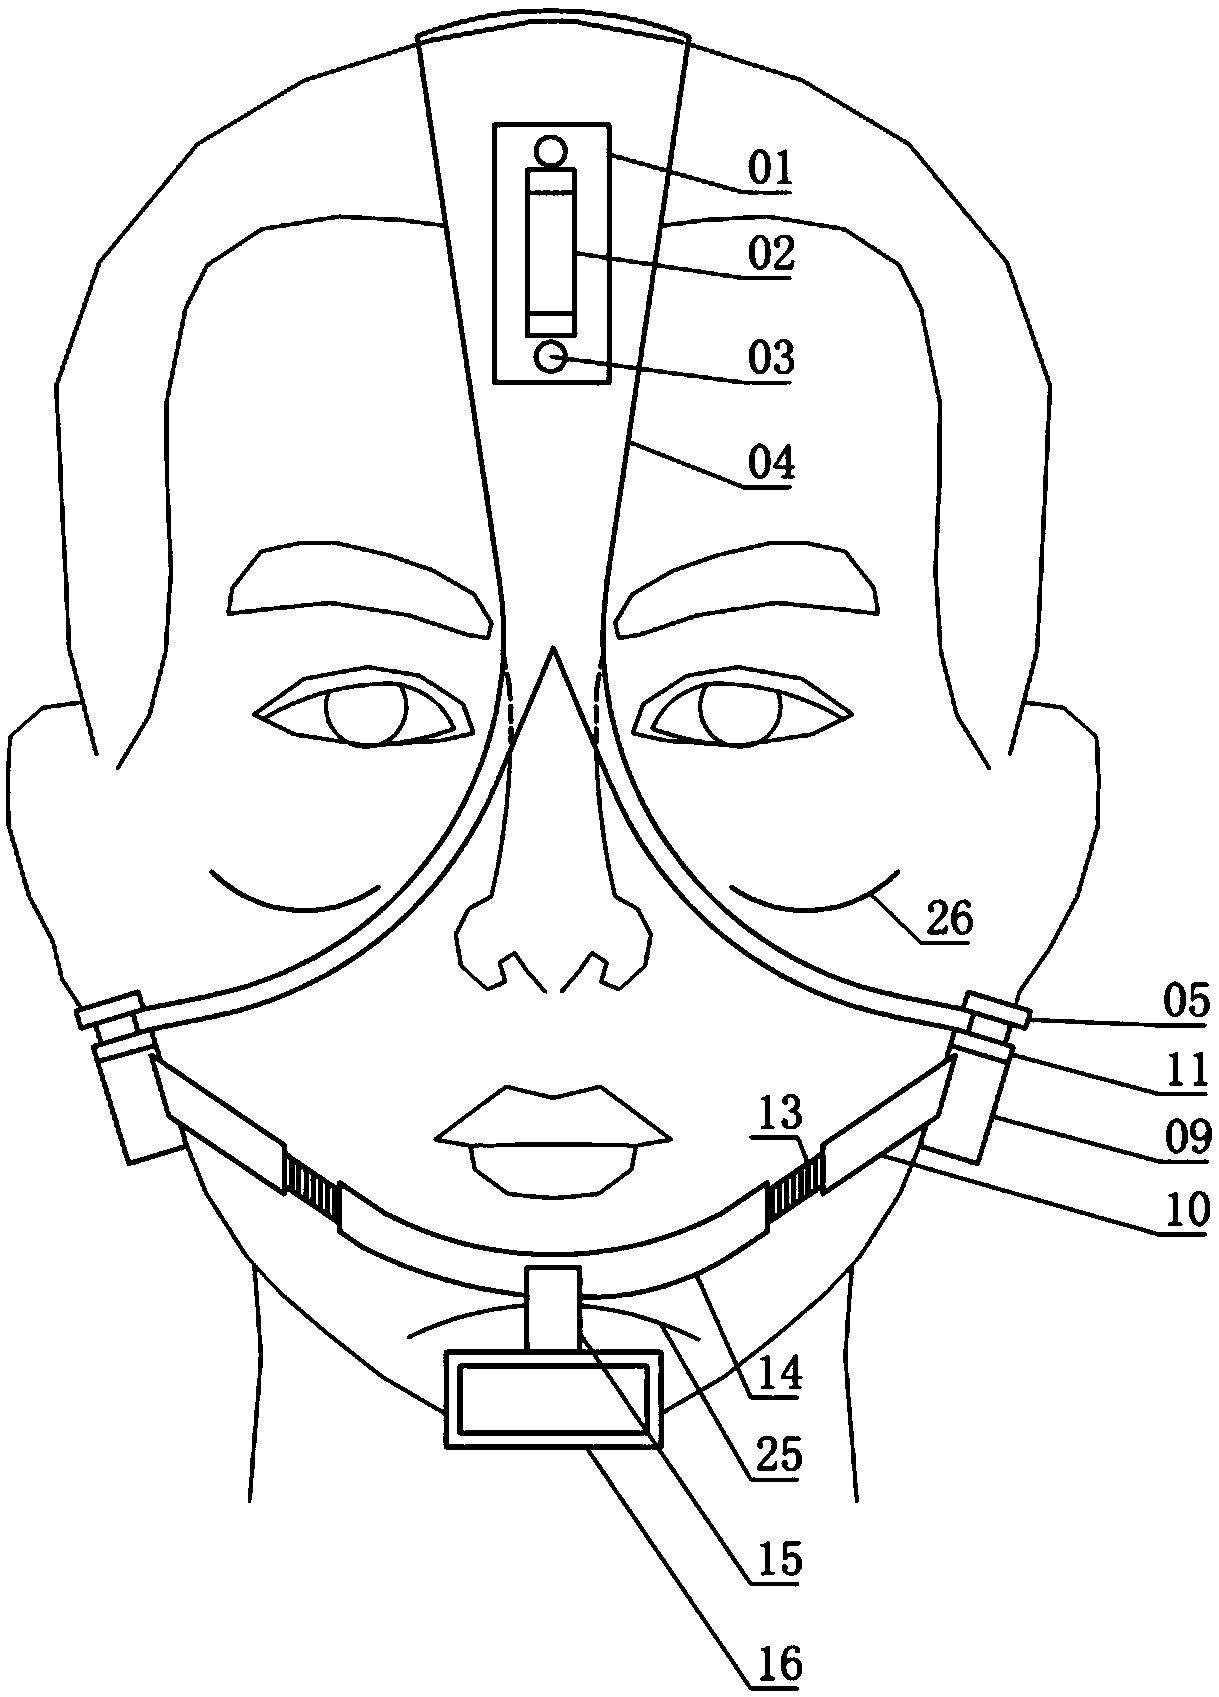 Zygomatic chin expansion angle type opening device